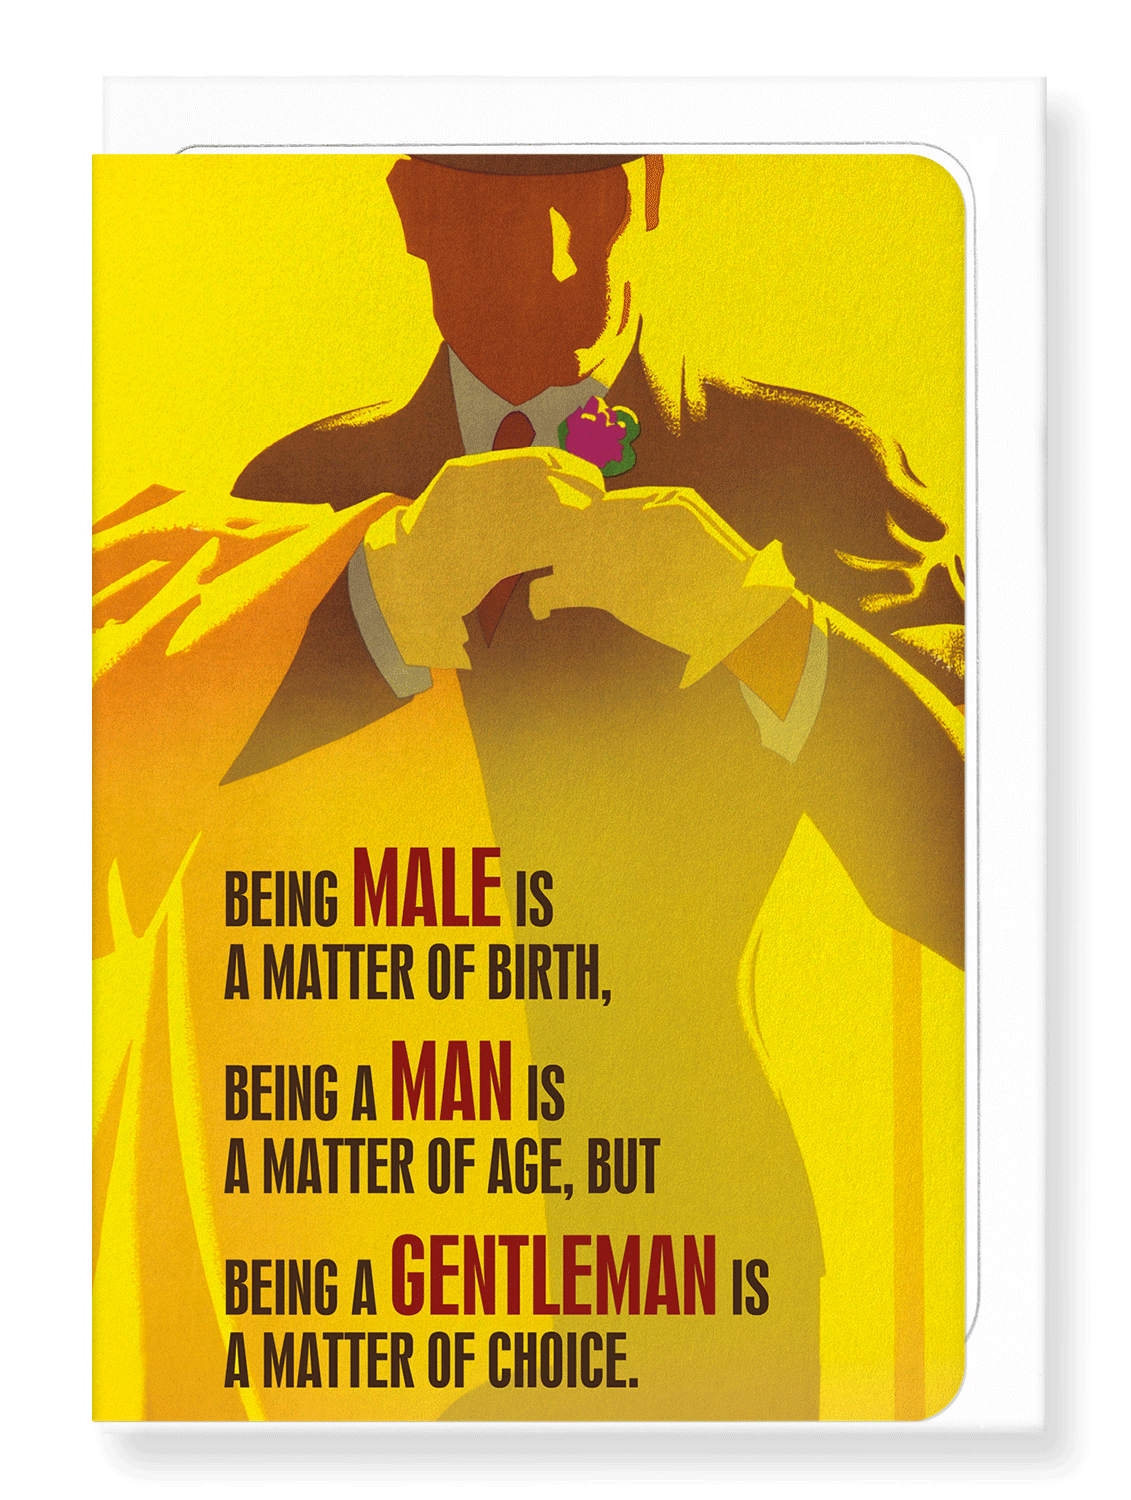 Ezen Designs - Being a gentleman is a choice - Greeting Card - Front